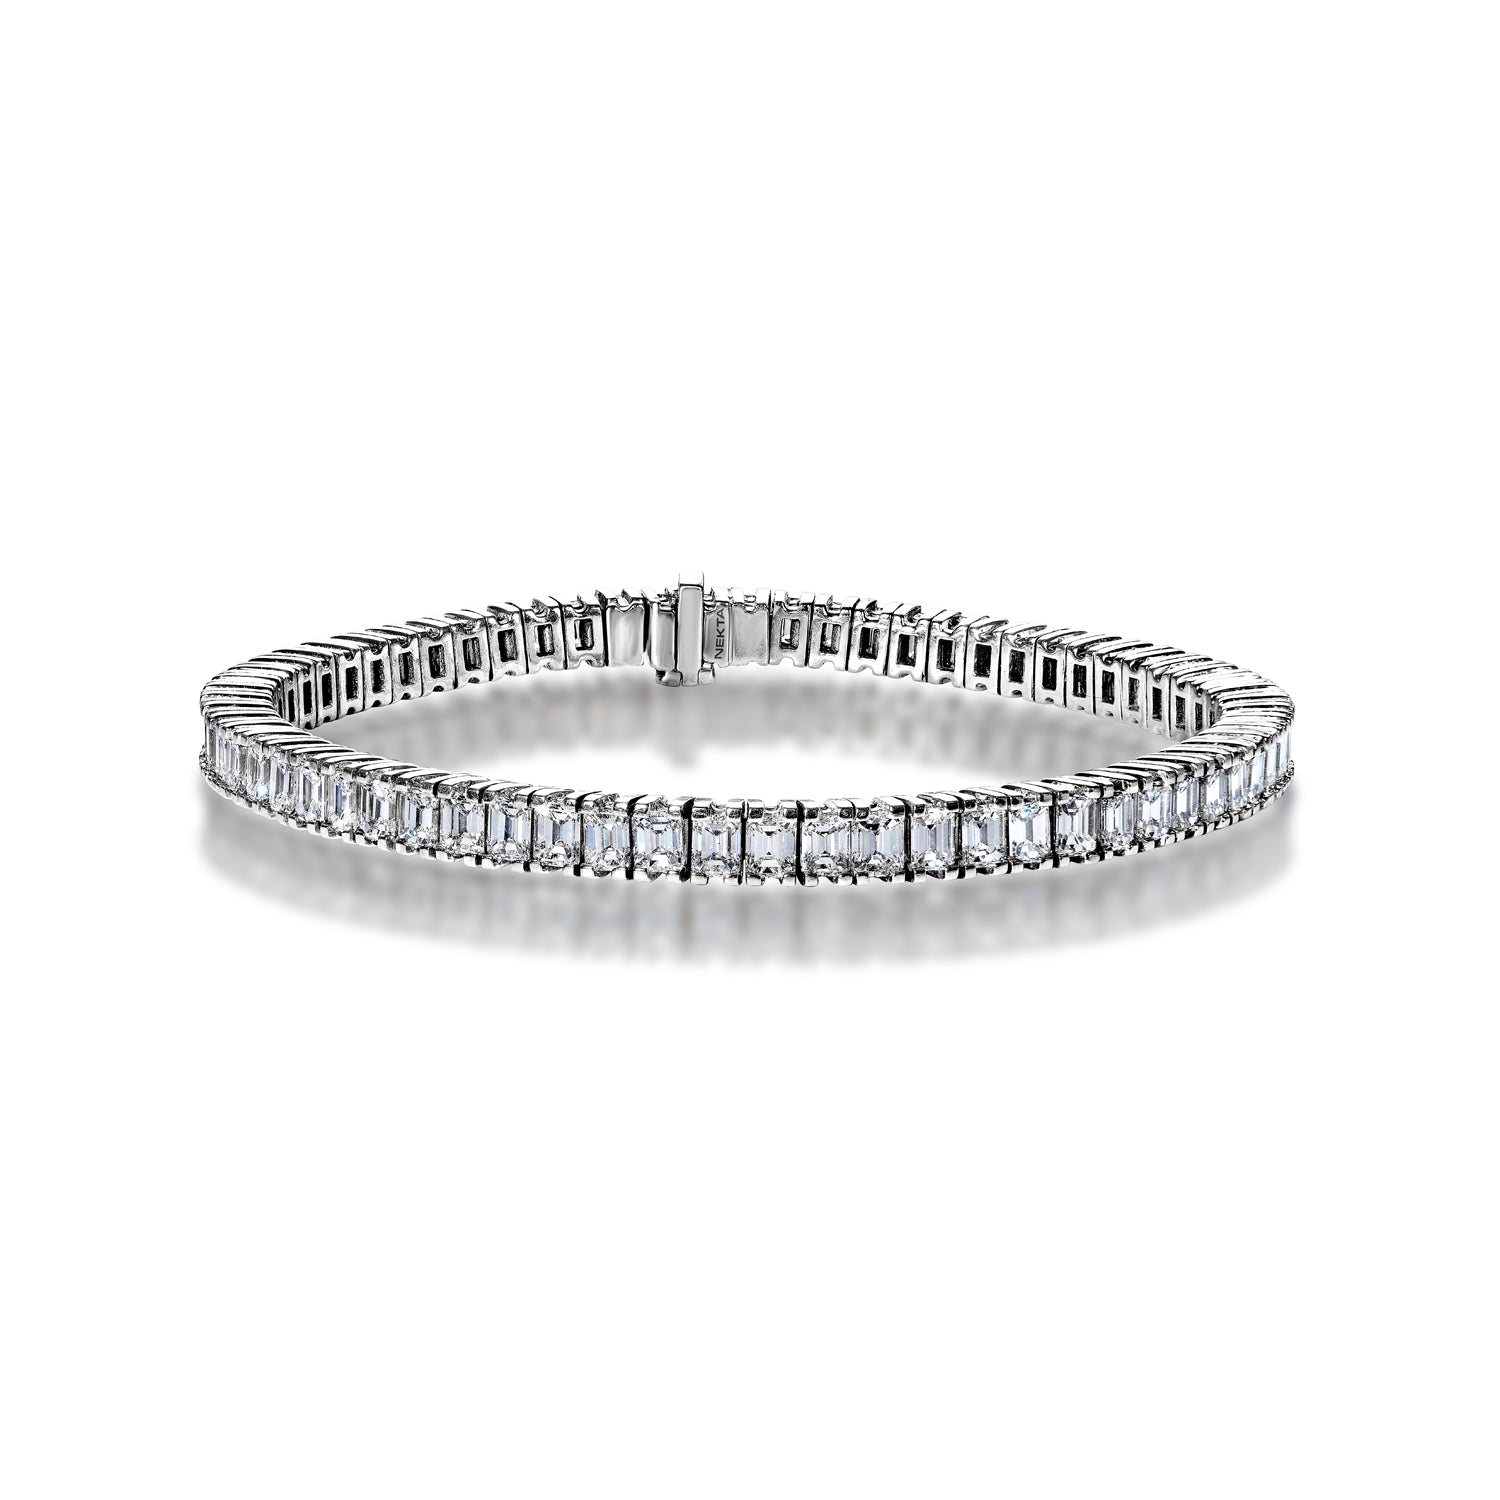 6 Row Mens Diamond Bracelet 1.35ct Gold Plated Sterling Silver 311005